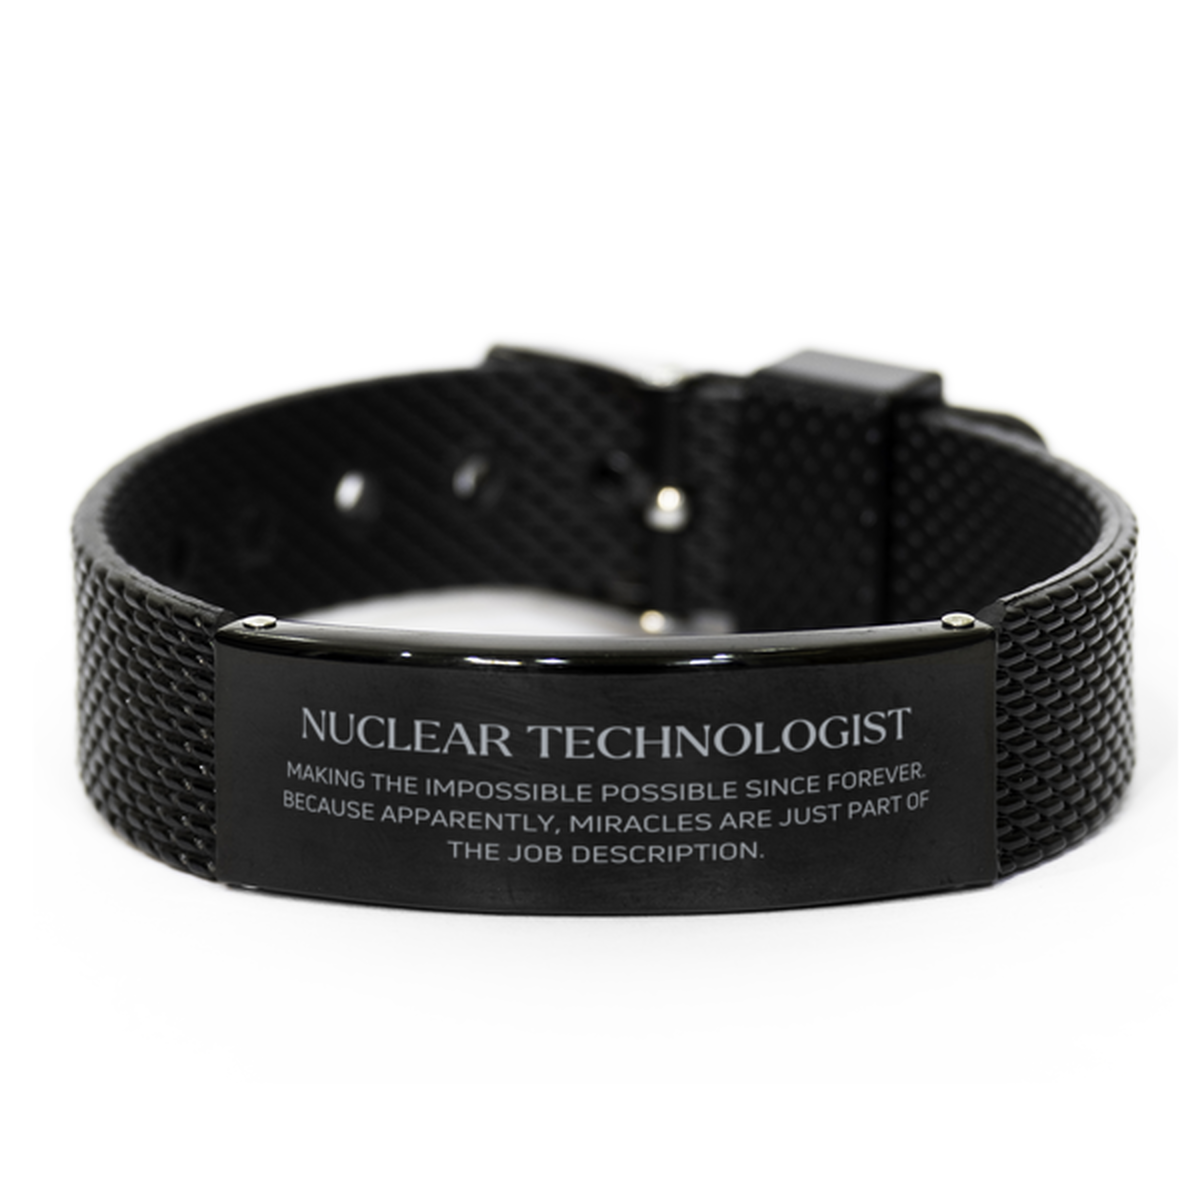 Funny Nuclear Technologist Gifts, Miracles are just part of the job description, Inspirational Birthday Black Shark Mesh Bracelet For Nuclear Technologist, Men, Women, Coworkers, Friends, Boss